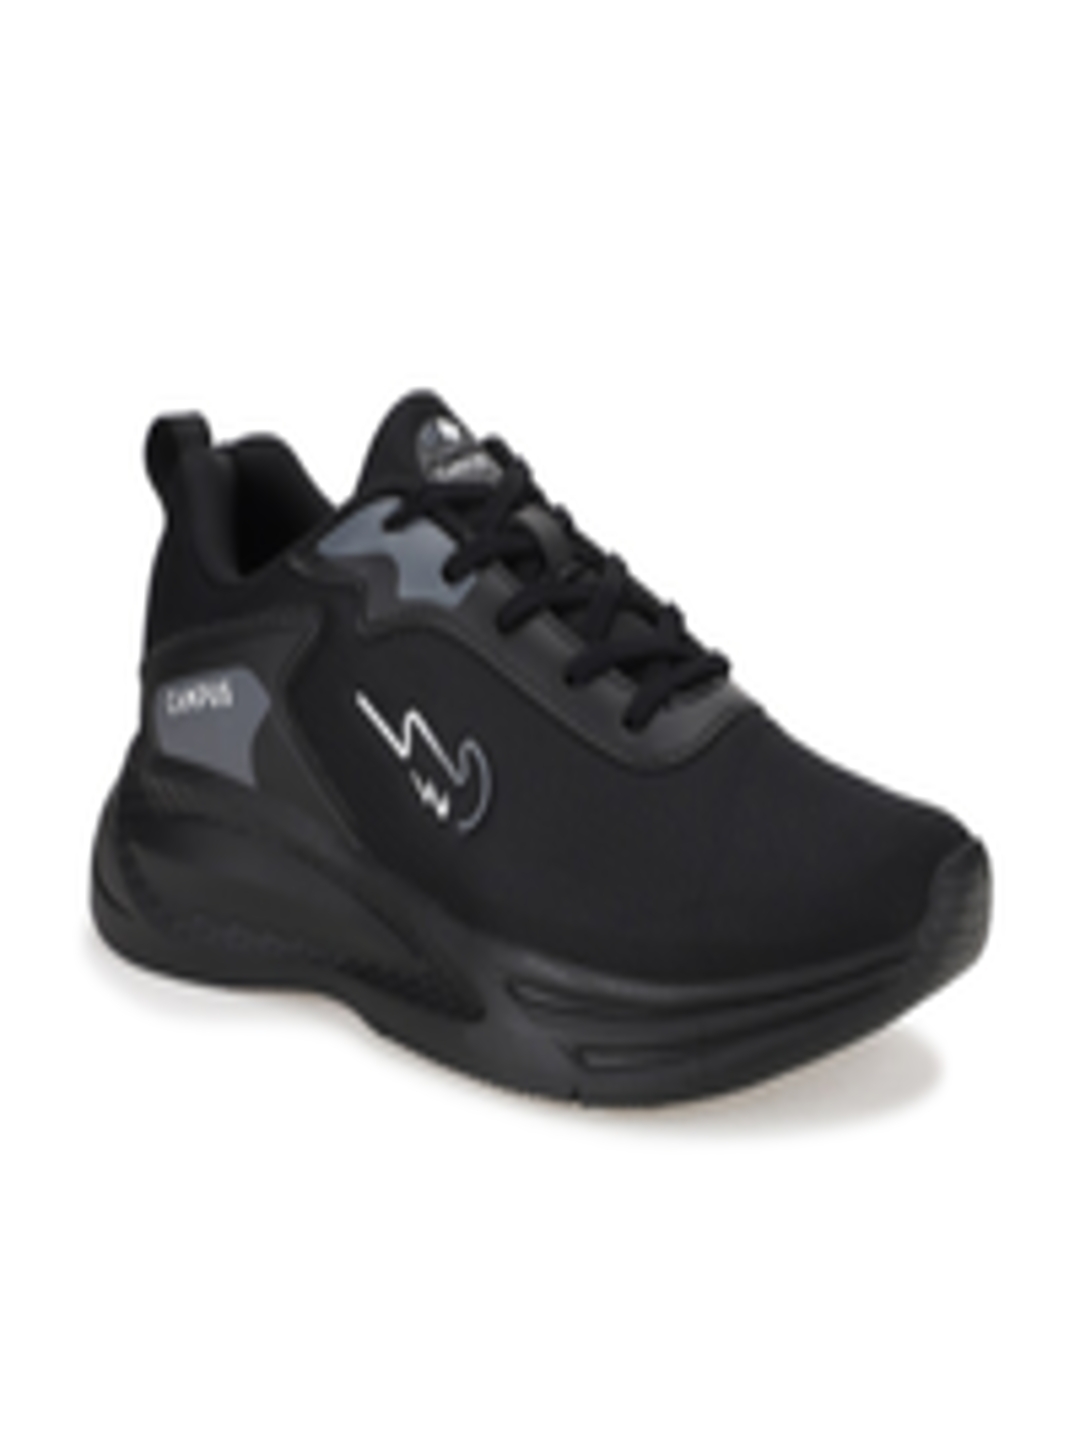 Buy Campus Men Non Marking Running Shoes - Sports Shoes for Men ...